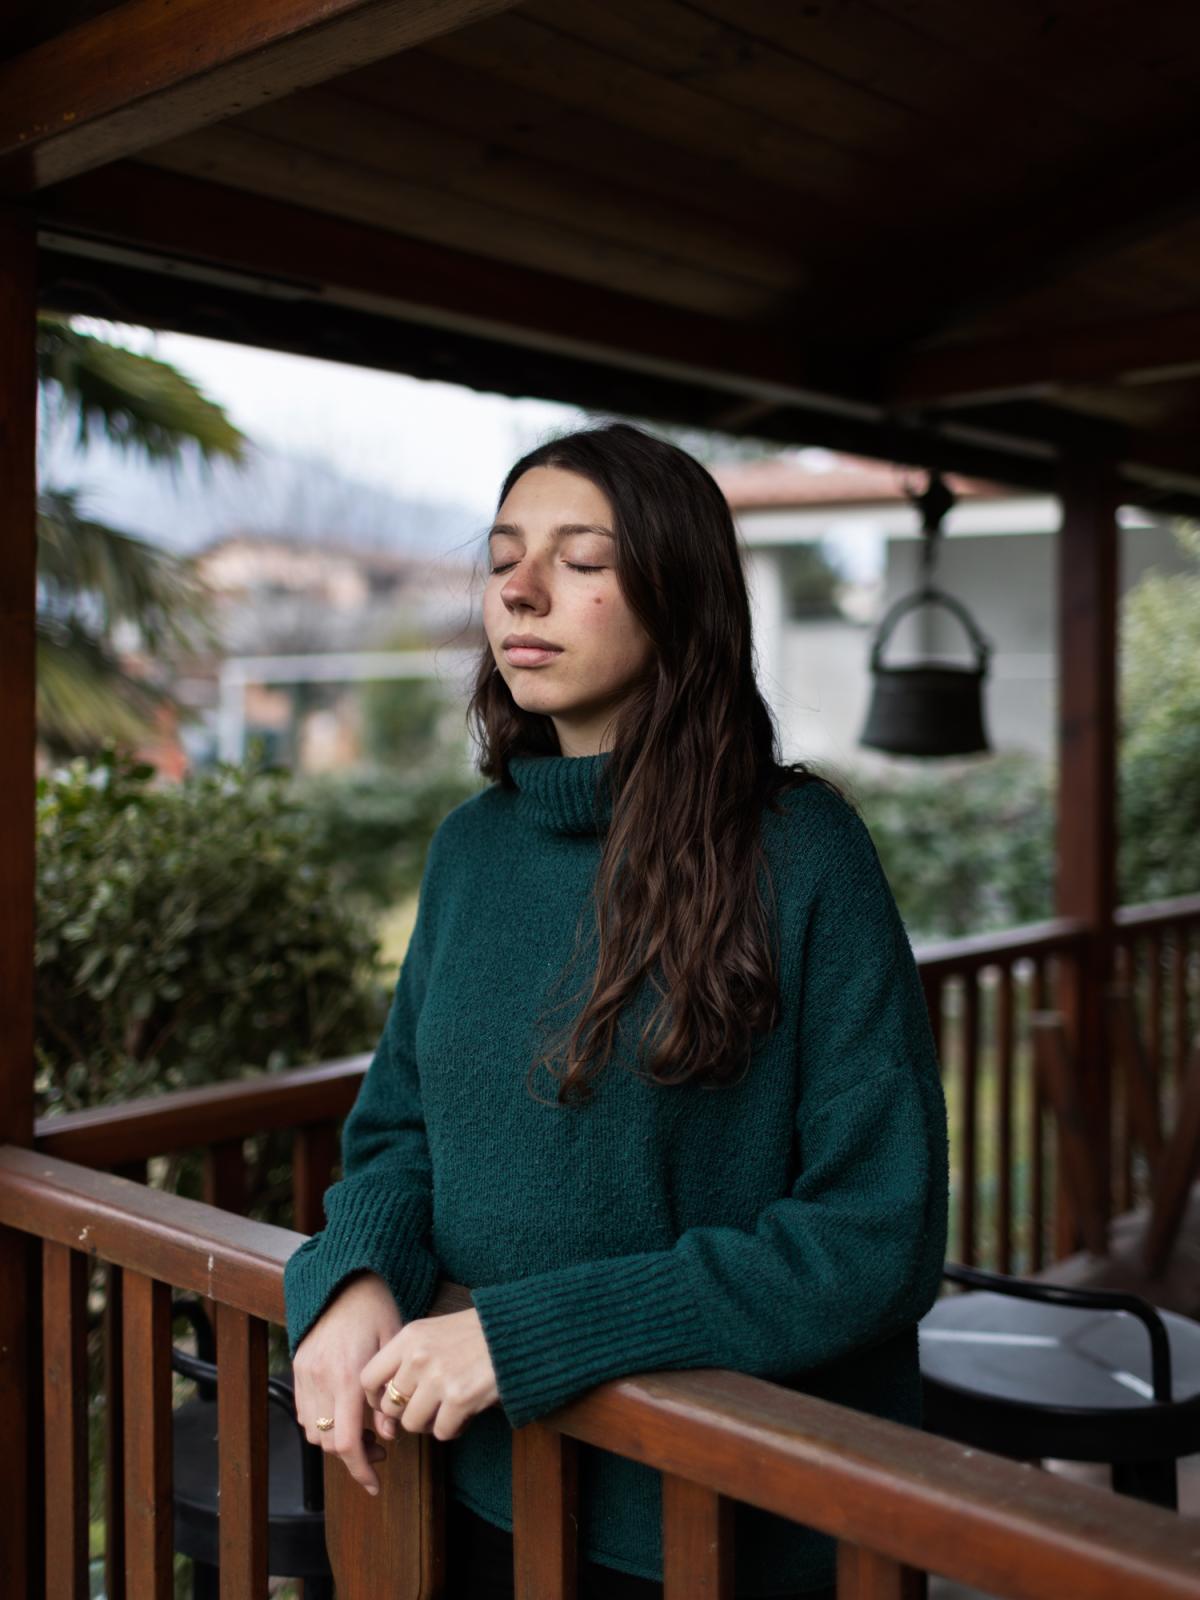 We are still dreaming - on going - Alessia, 25, in her house garden in Chiusa di San...